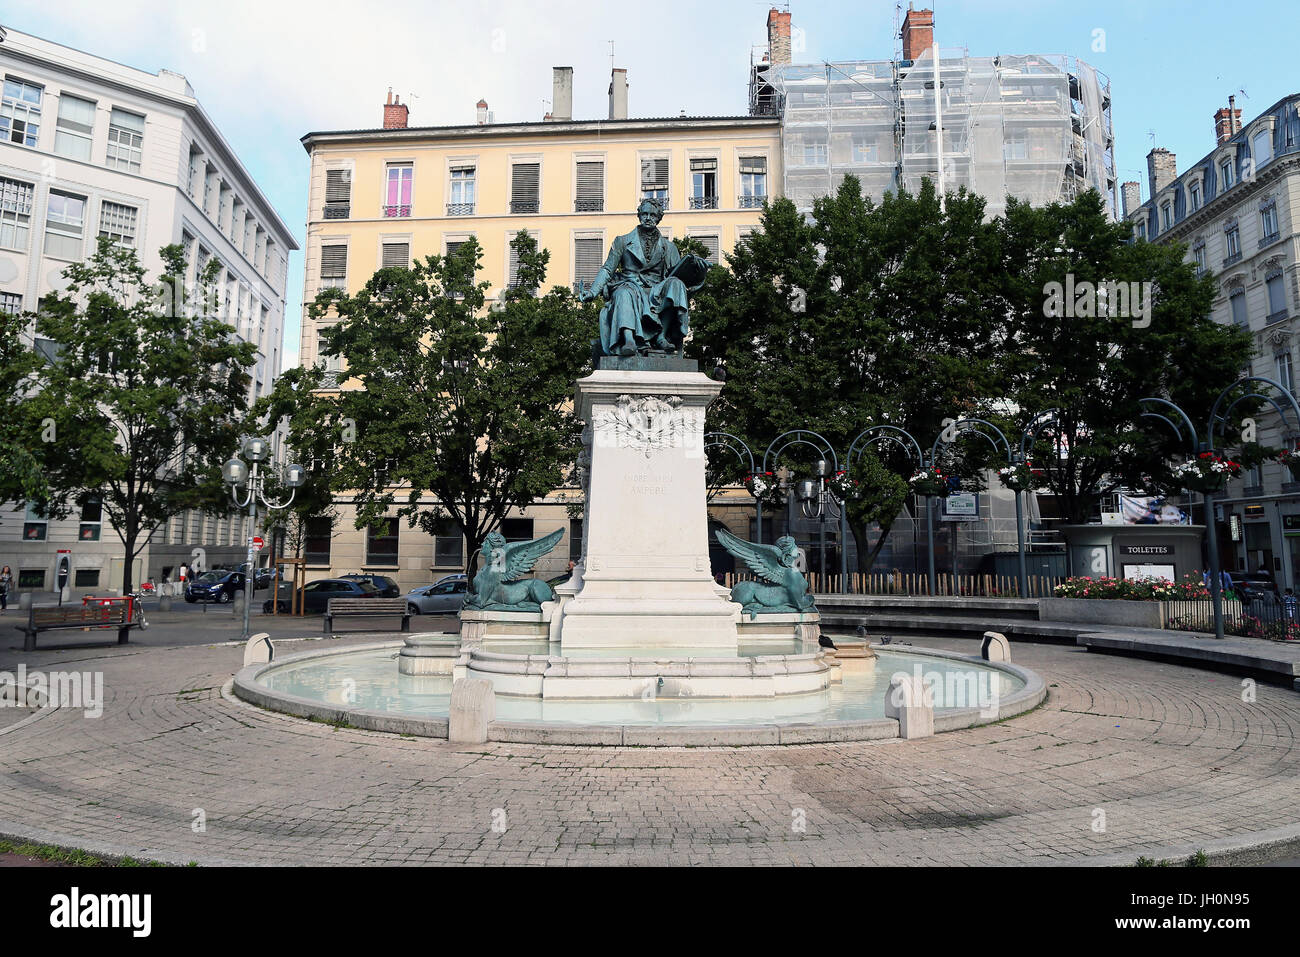 A statue made by Charles Textor portraying AndrŽ-Marie Ampre was erected in the center of the square. Lyon. France. Stock Photo